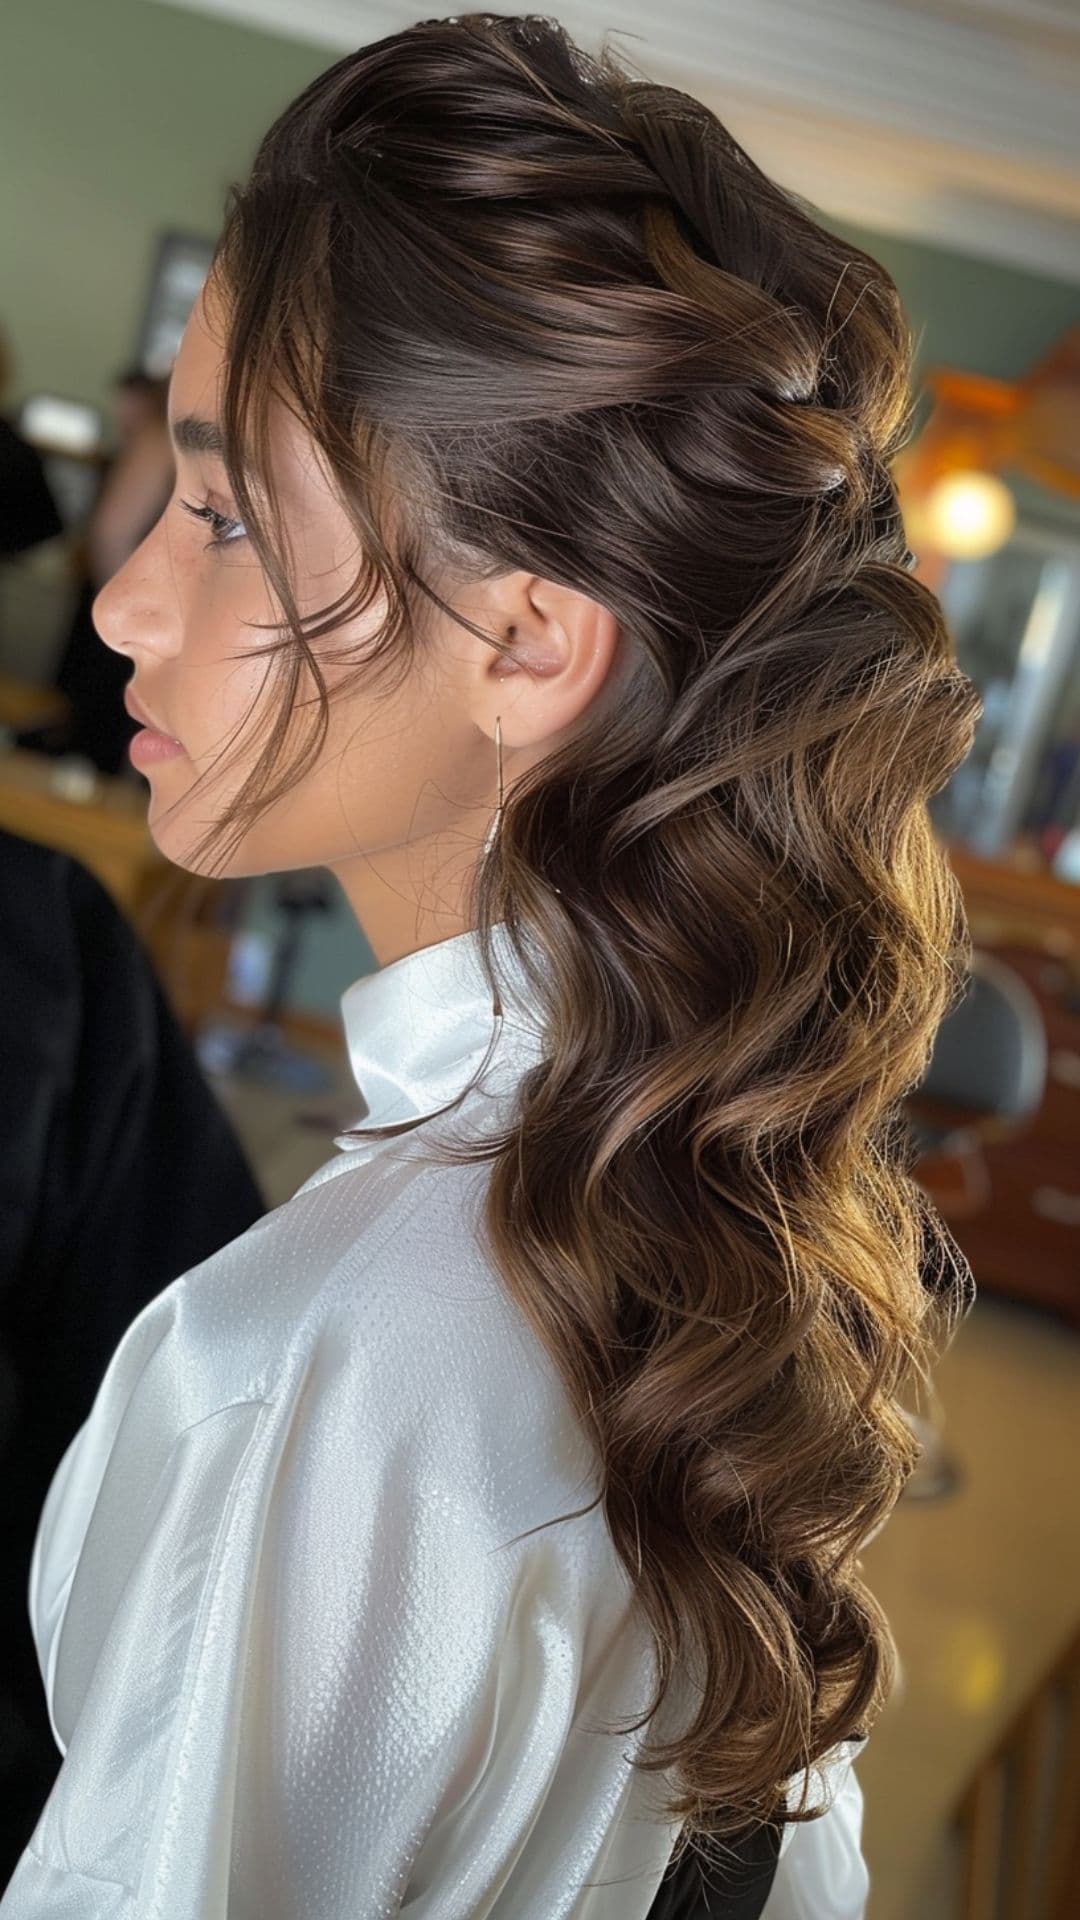 A woman modelling a wavy half-updo hairstyle.